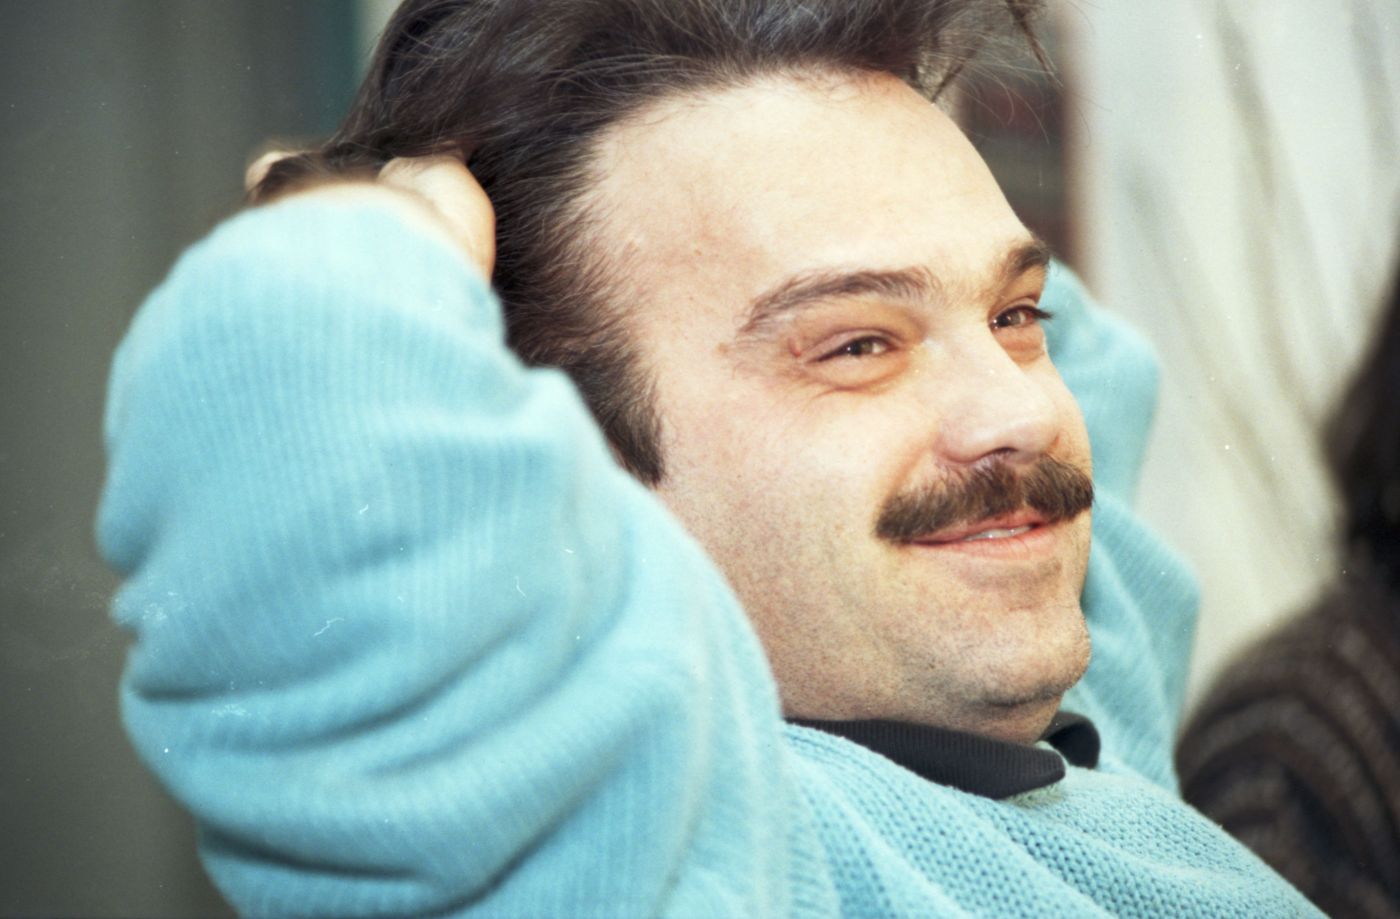 "Colour photograph of a middle-aged man, three-quarter-view. He is smiling, sitting with both hands behind his head. He has brown hair and a mustache. He wears a pale blue sweater.   "